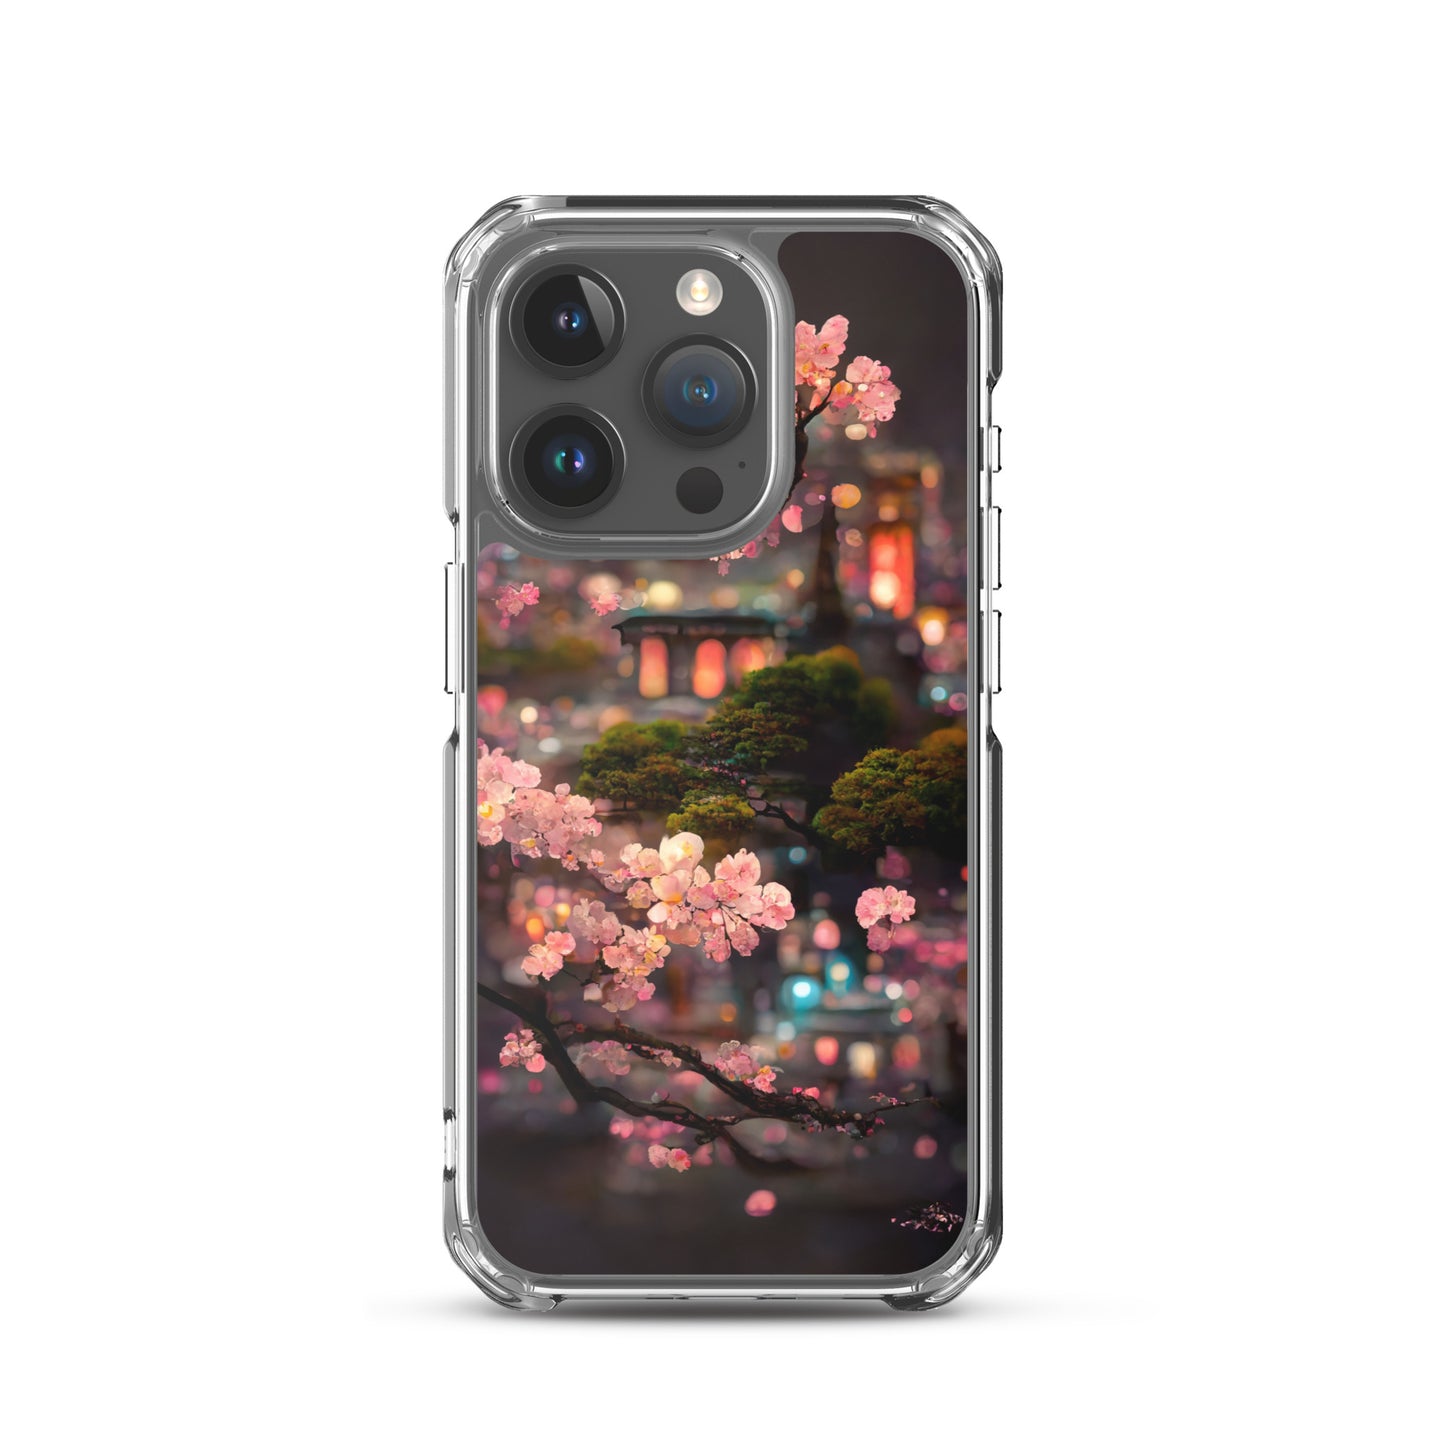 iPhone Case - Kyoto Cherry Blossoms #8